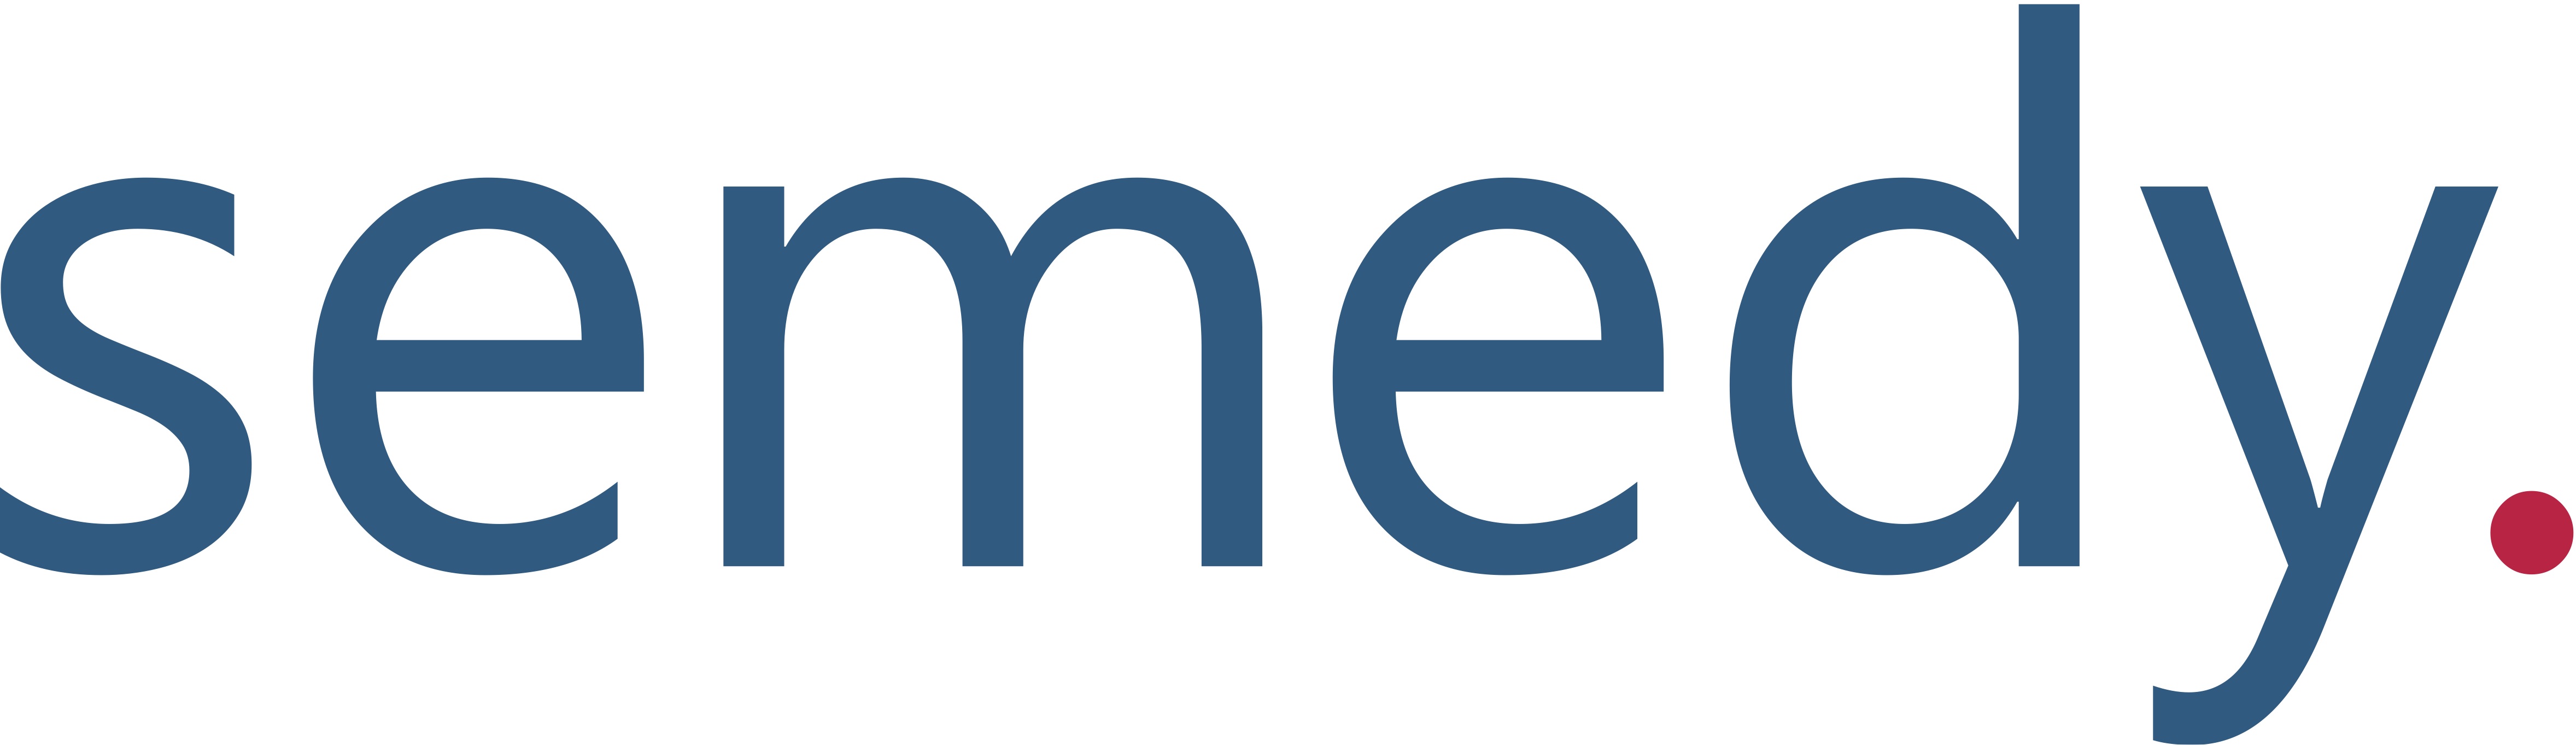 Press release: Clinerion partners with Semedy to incorporate Semedy’s Clinical Knowledge Management System technology into Clinerion’s Patient Network Explorer.